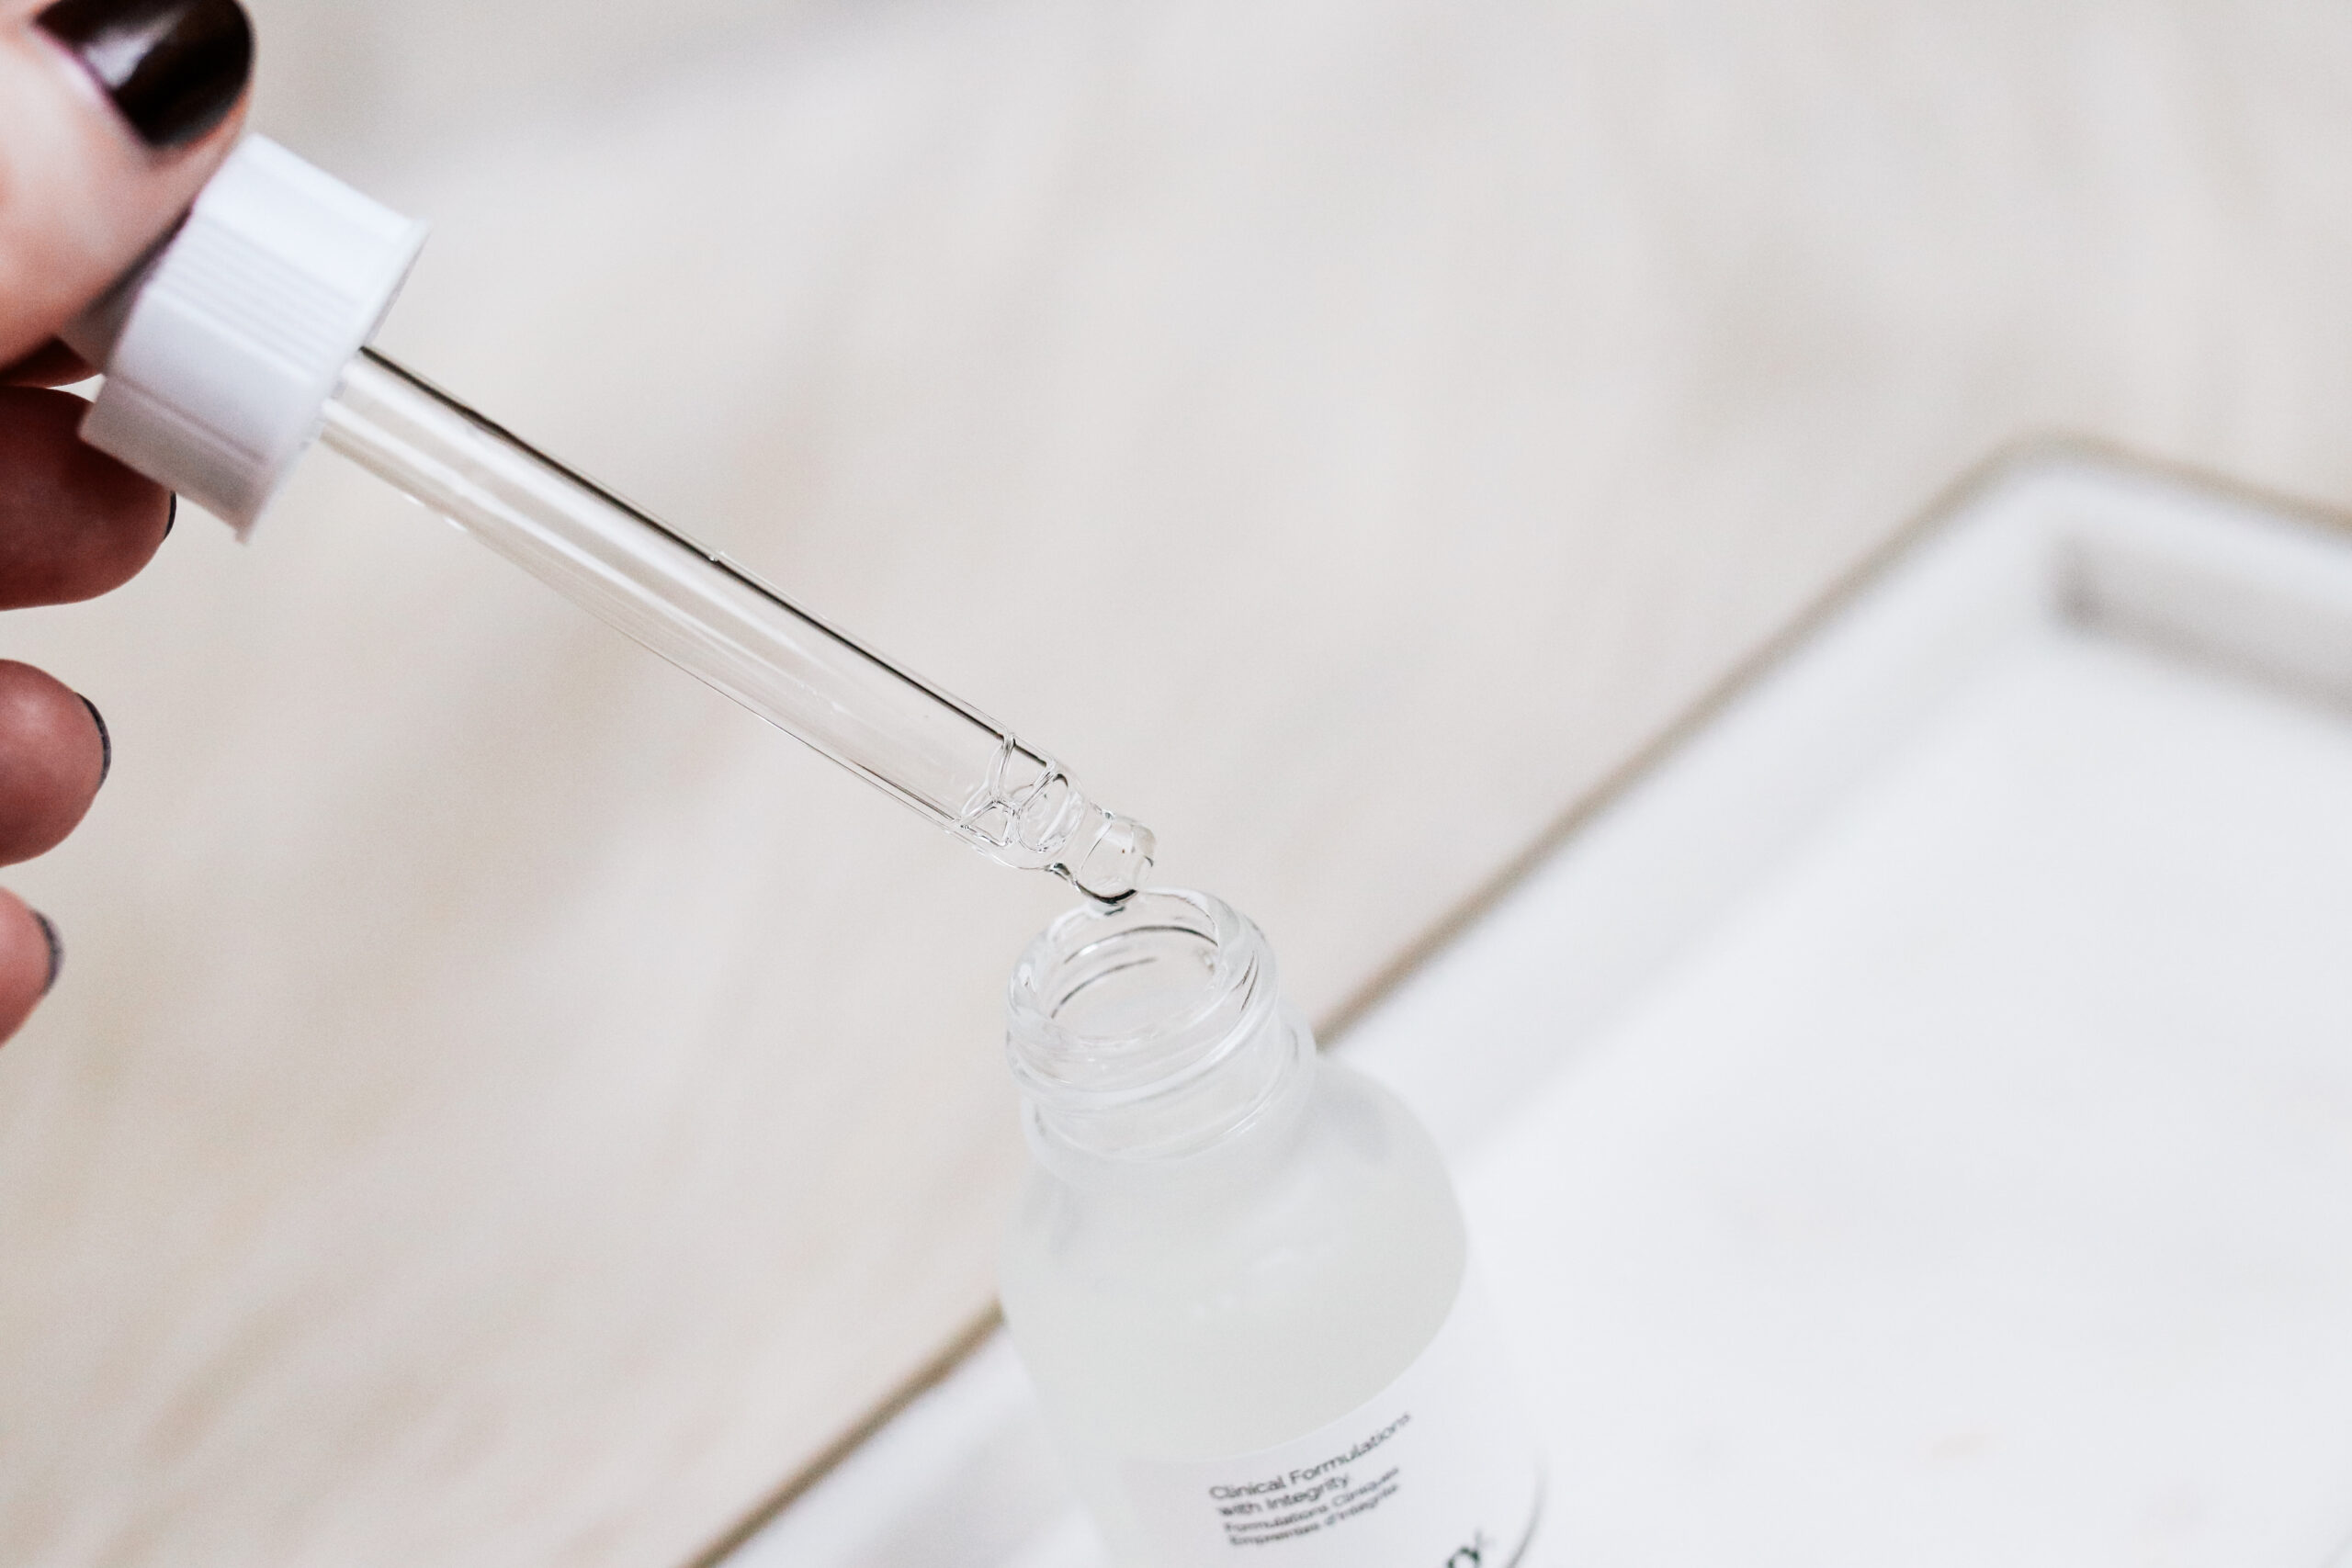 Where to Buy The Ordinary Hyaluronic Acid serum